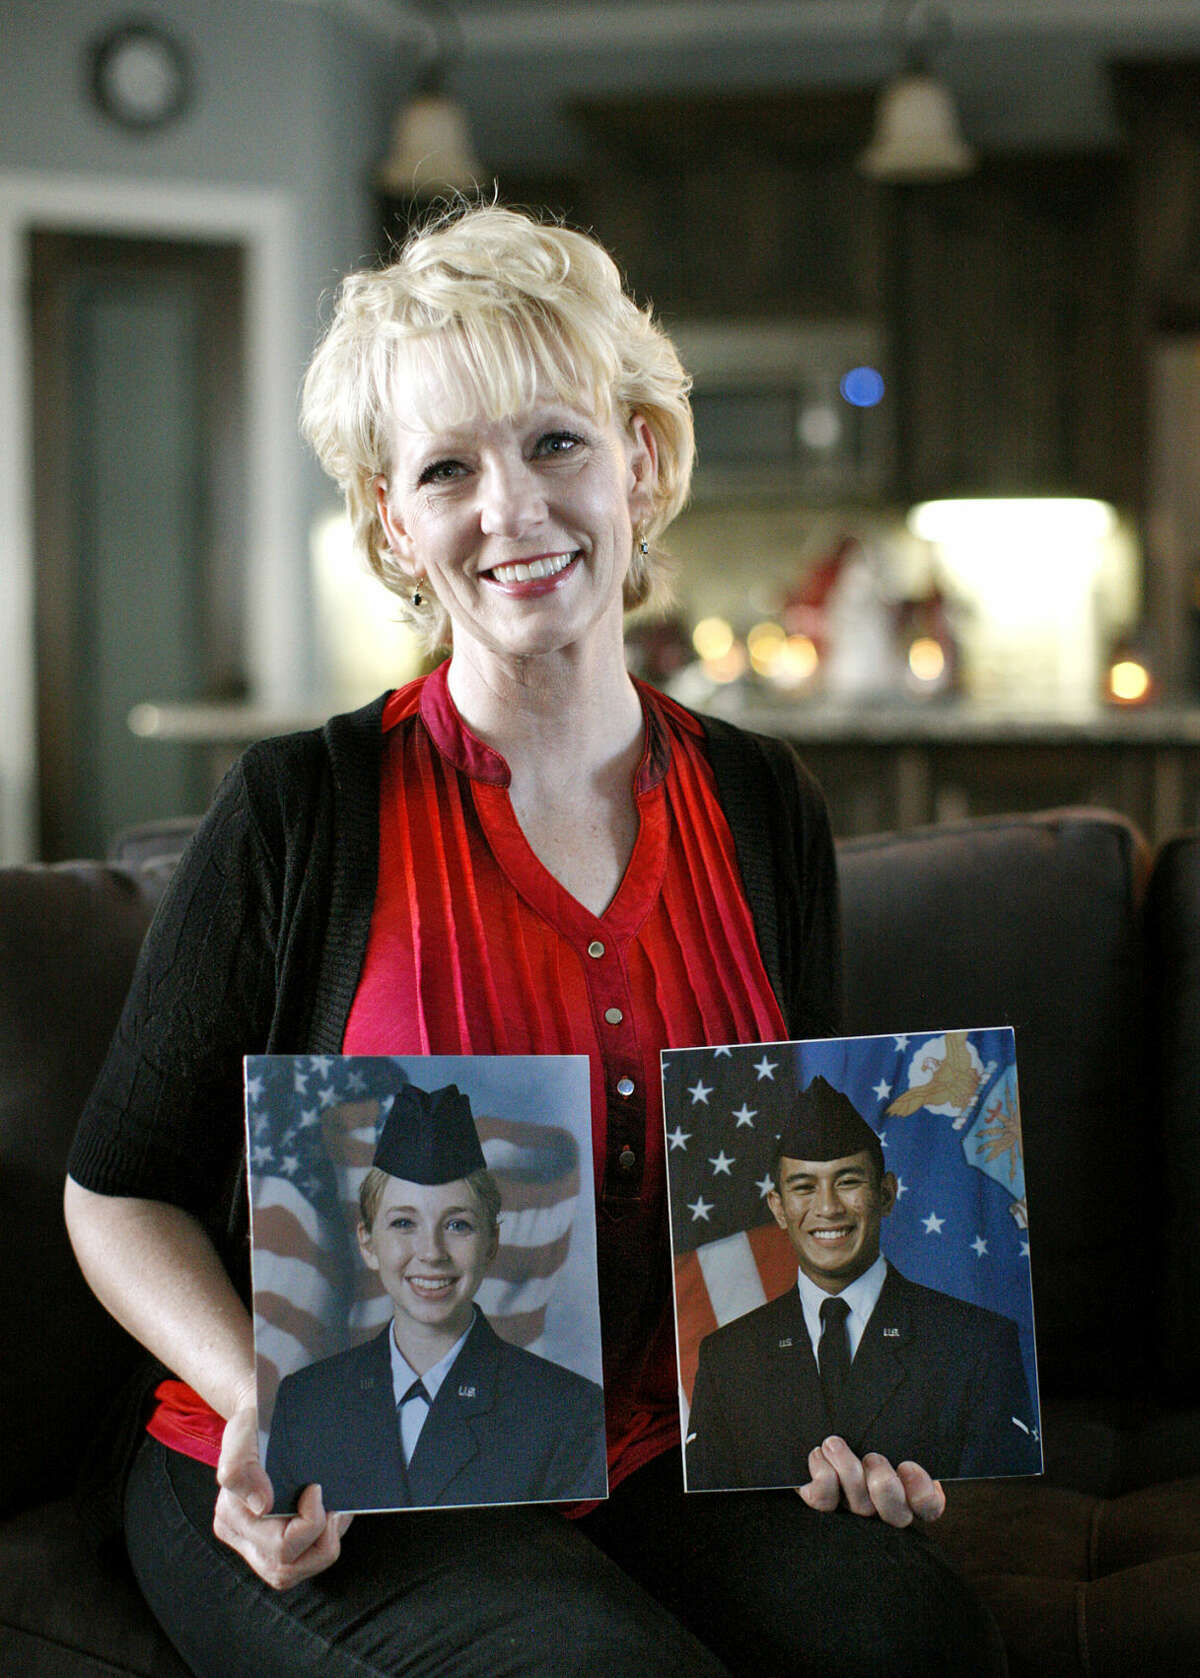 Stephanie Harper, a US Air Force veteran, poses with pictures of her son and daughter who are also veterans of the USAF, on Friday, Dec. 4, 2015, at her home in west Midland. James Durbin/Reporter-Telegram